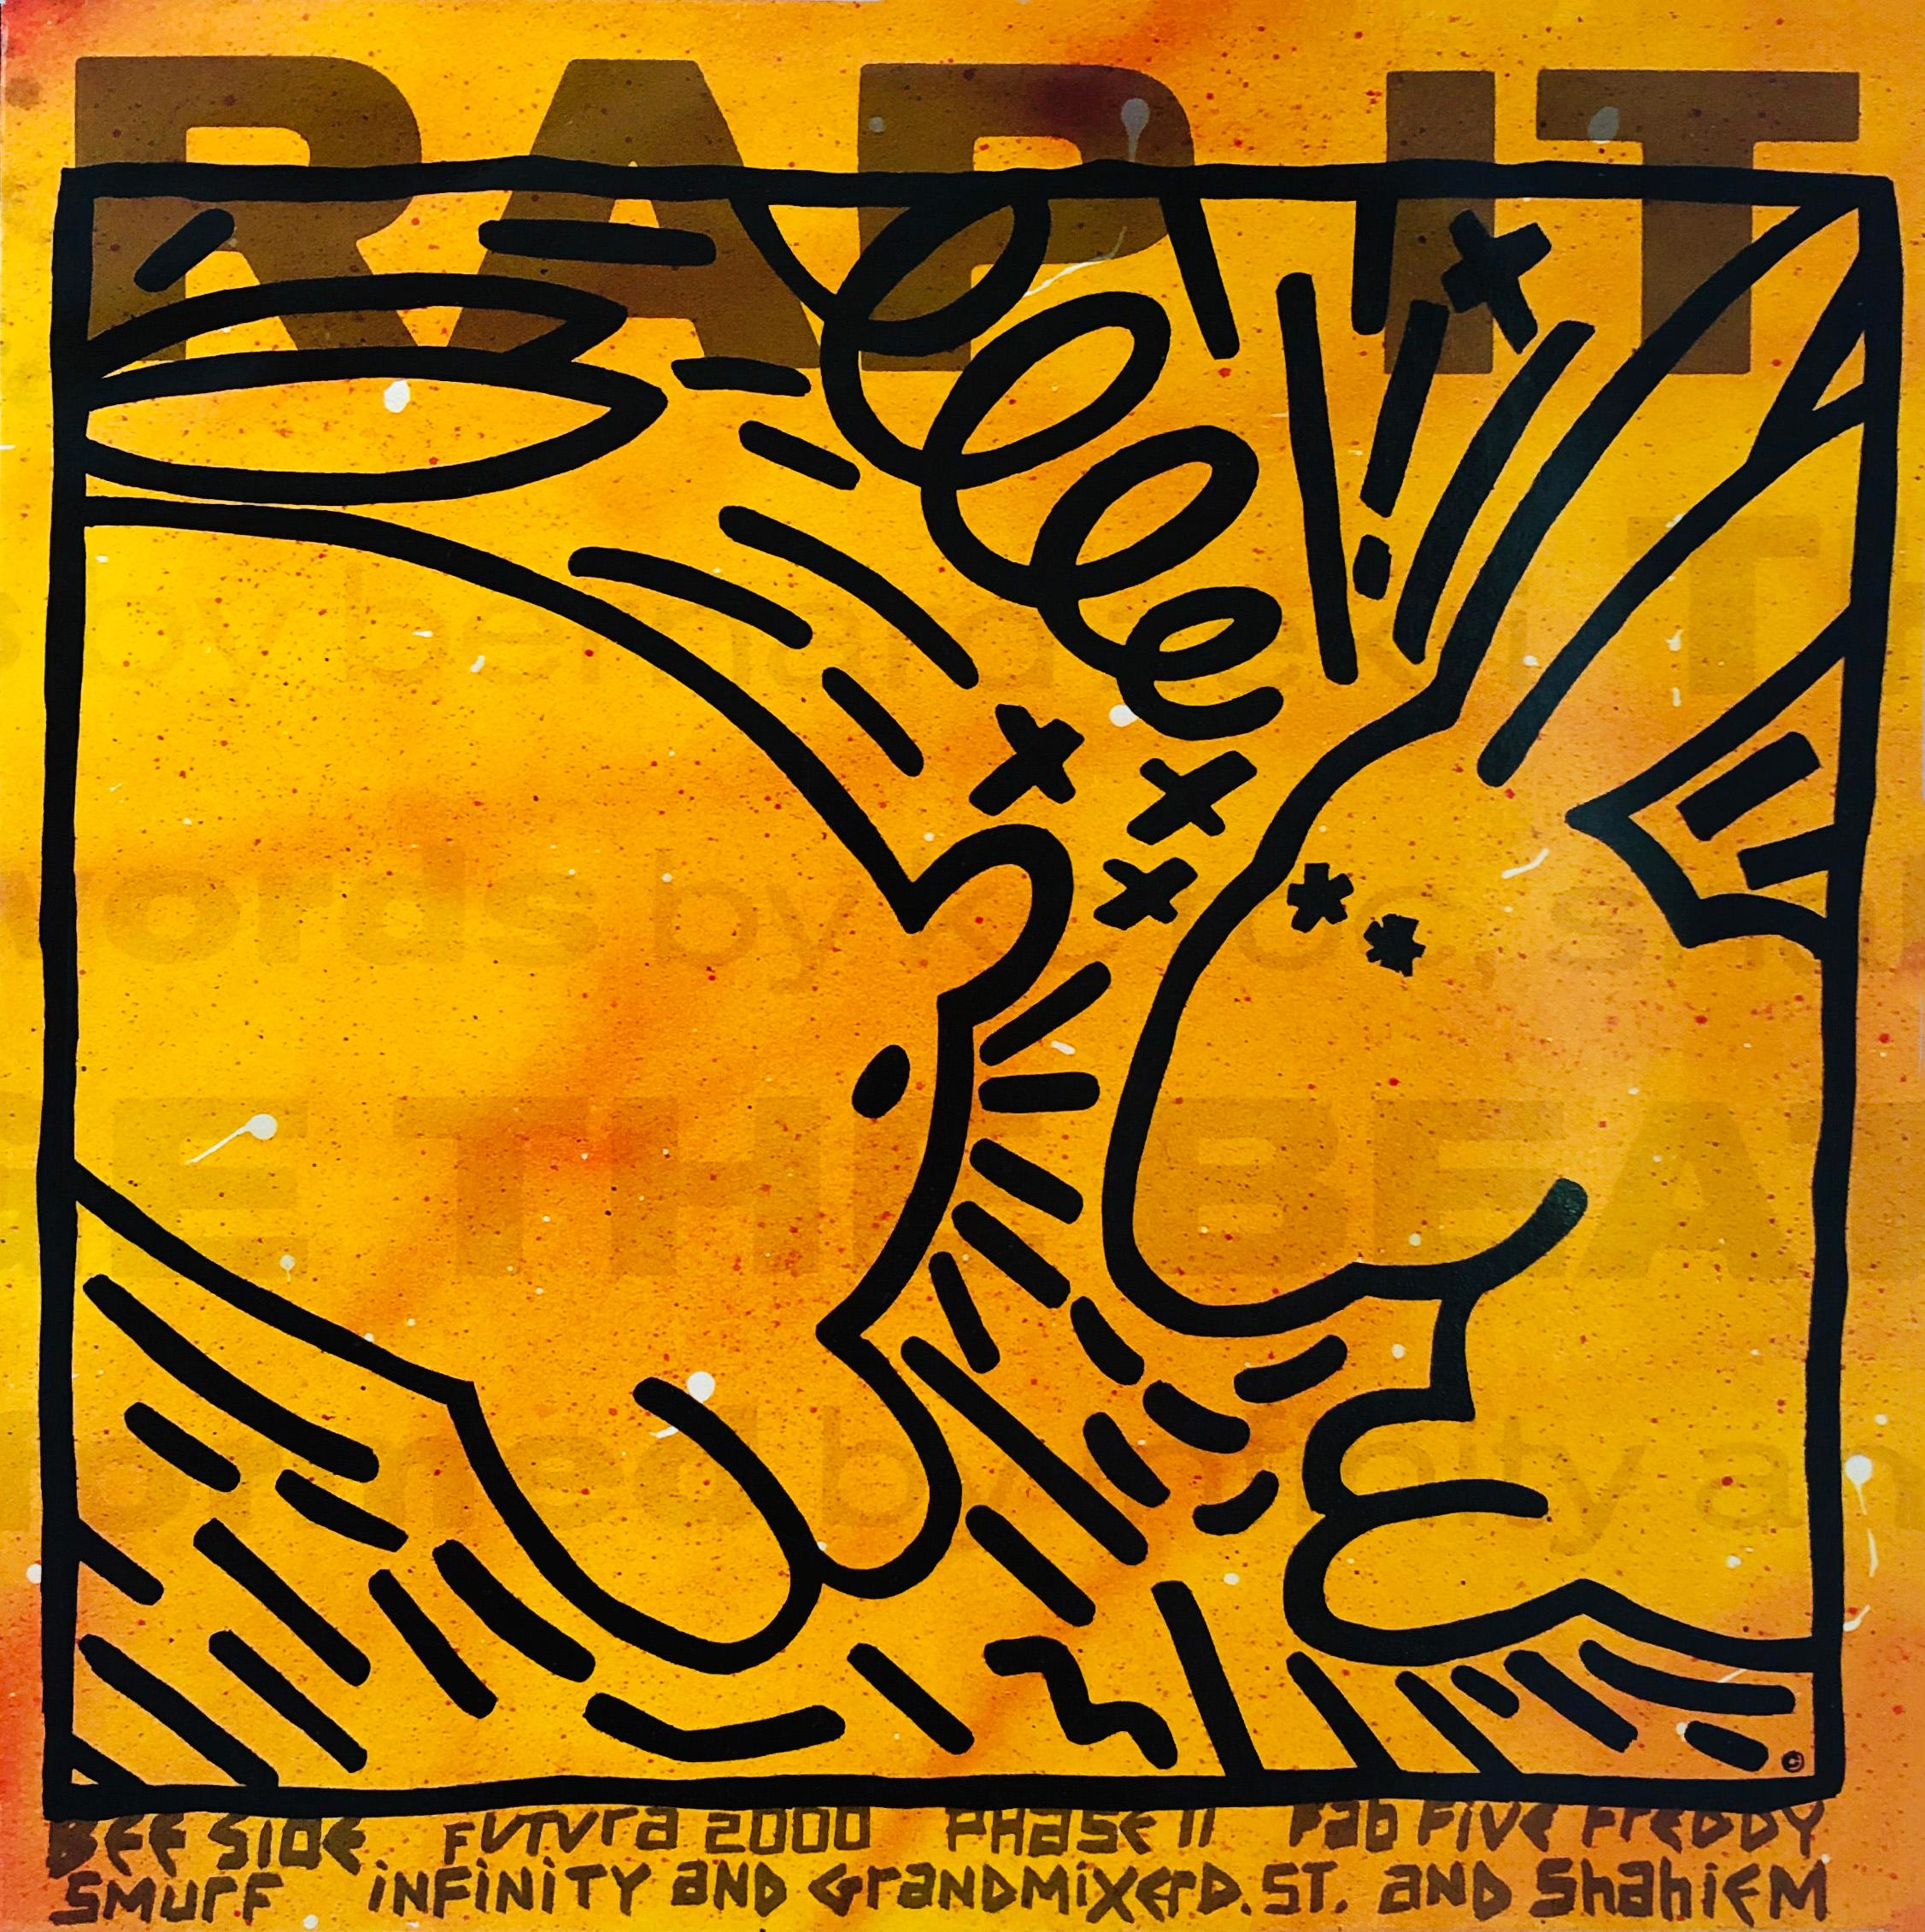 Keith Haring 'Rap It' record art 1983:
A rare vinyl art cover featuring original artwork by Keith Haring and Futura 2000 (reverse side). Truly vibrant colors that make for stand-out wall art. Looks very cool framed. 

In 1983 Material did some